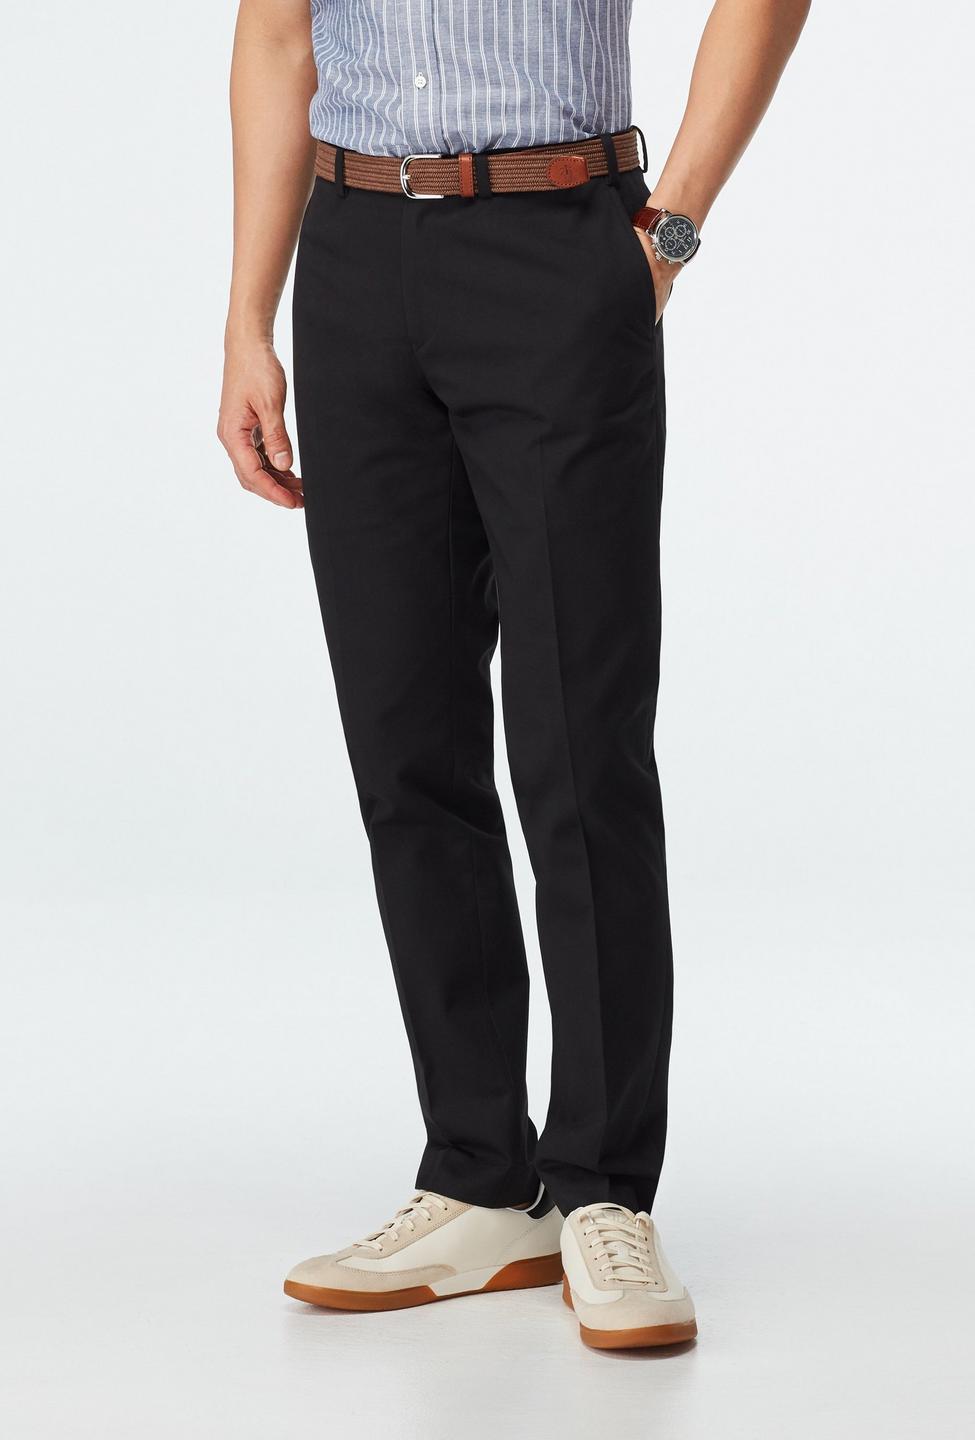 Black pants - Halton Solid Design from Premium Indochino Collection